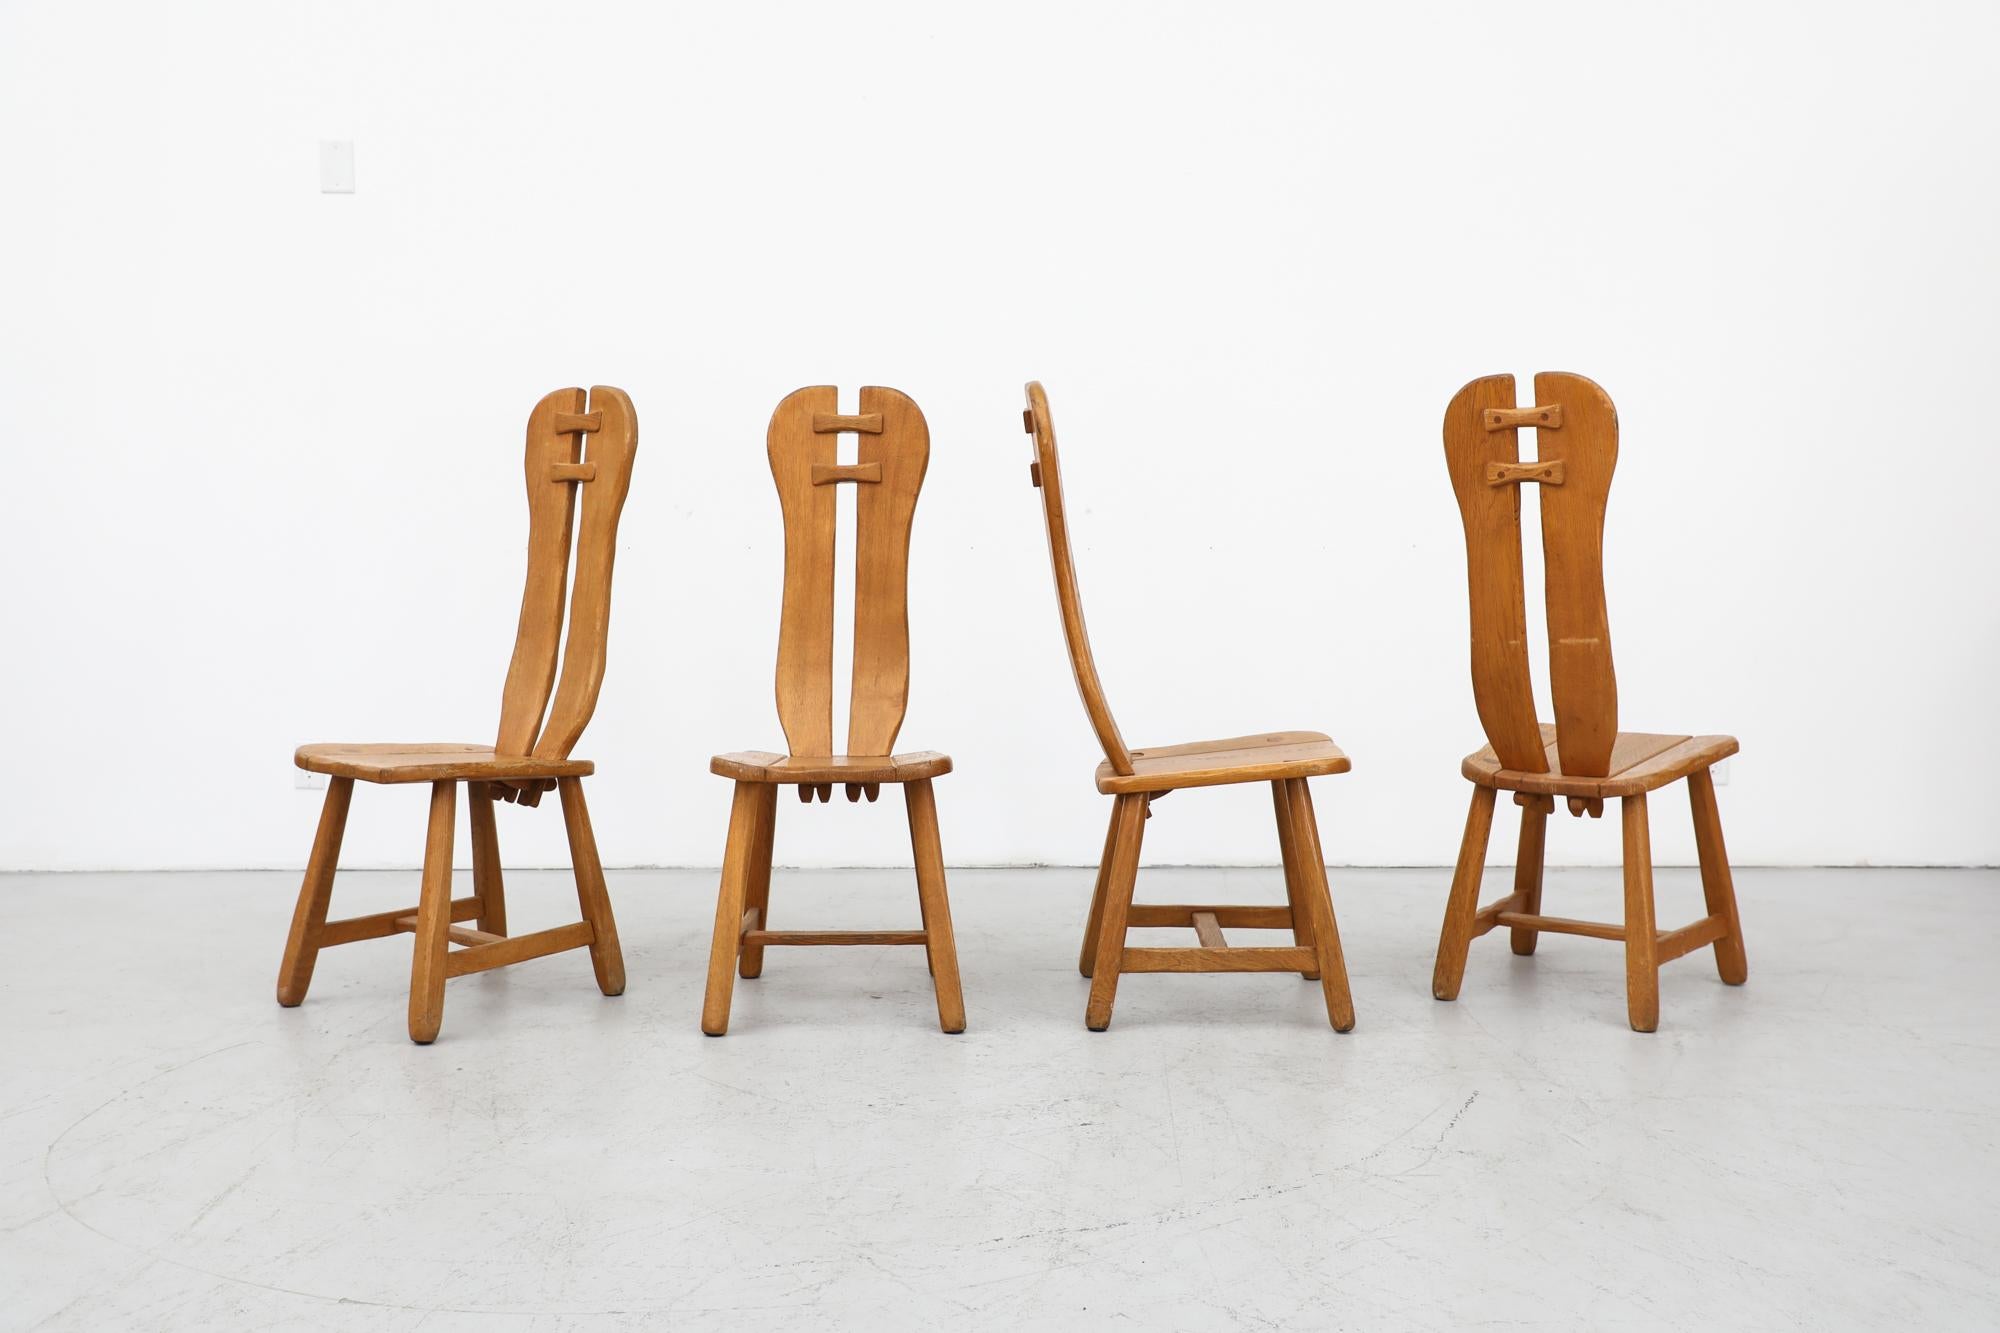 Set of 4 high back brutalist dining chairs by De Puydt, Belgium. 1970's rough oak with beautiful, heavy grain and normal wear and patina appropriate for their age. In original condition with some visible cracking. Other brutalist sets of chairs are